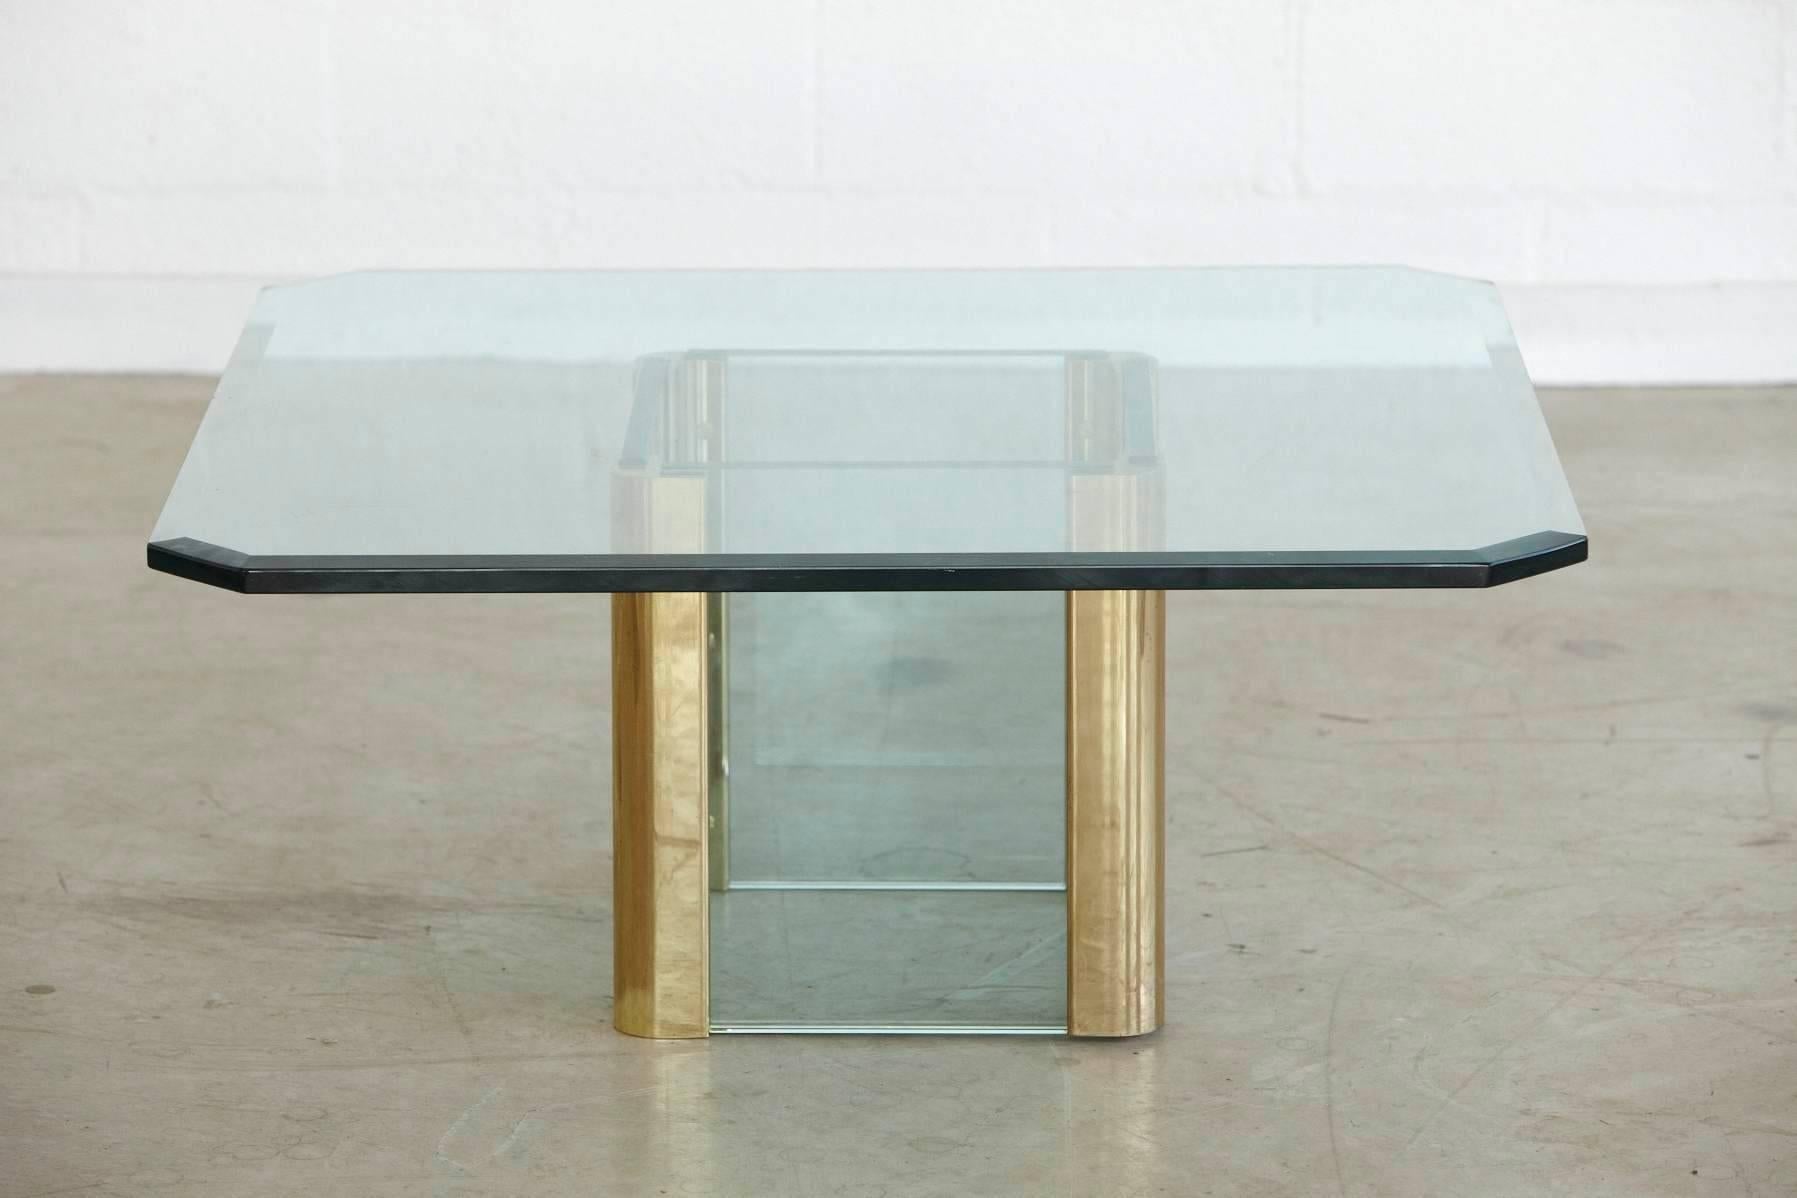 Beautiful large coffee table with a square (octagonal) beveled 3/4 inch thick glass top mounted on a base comprised of four 3/4 inch glass panels encased in rounded brass elements. 
Designed by Leon Rosen for Pace in the 1970s.
Dimensions: Base is W